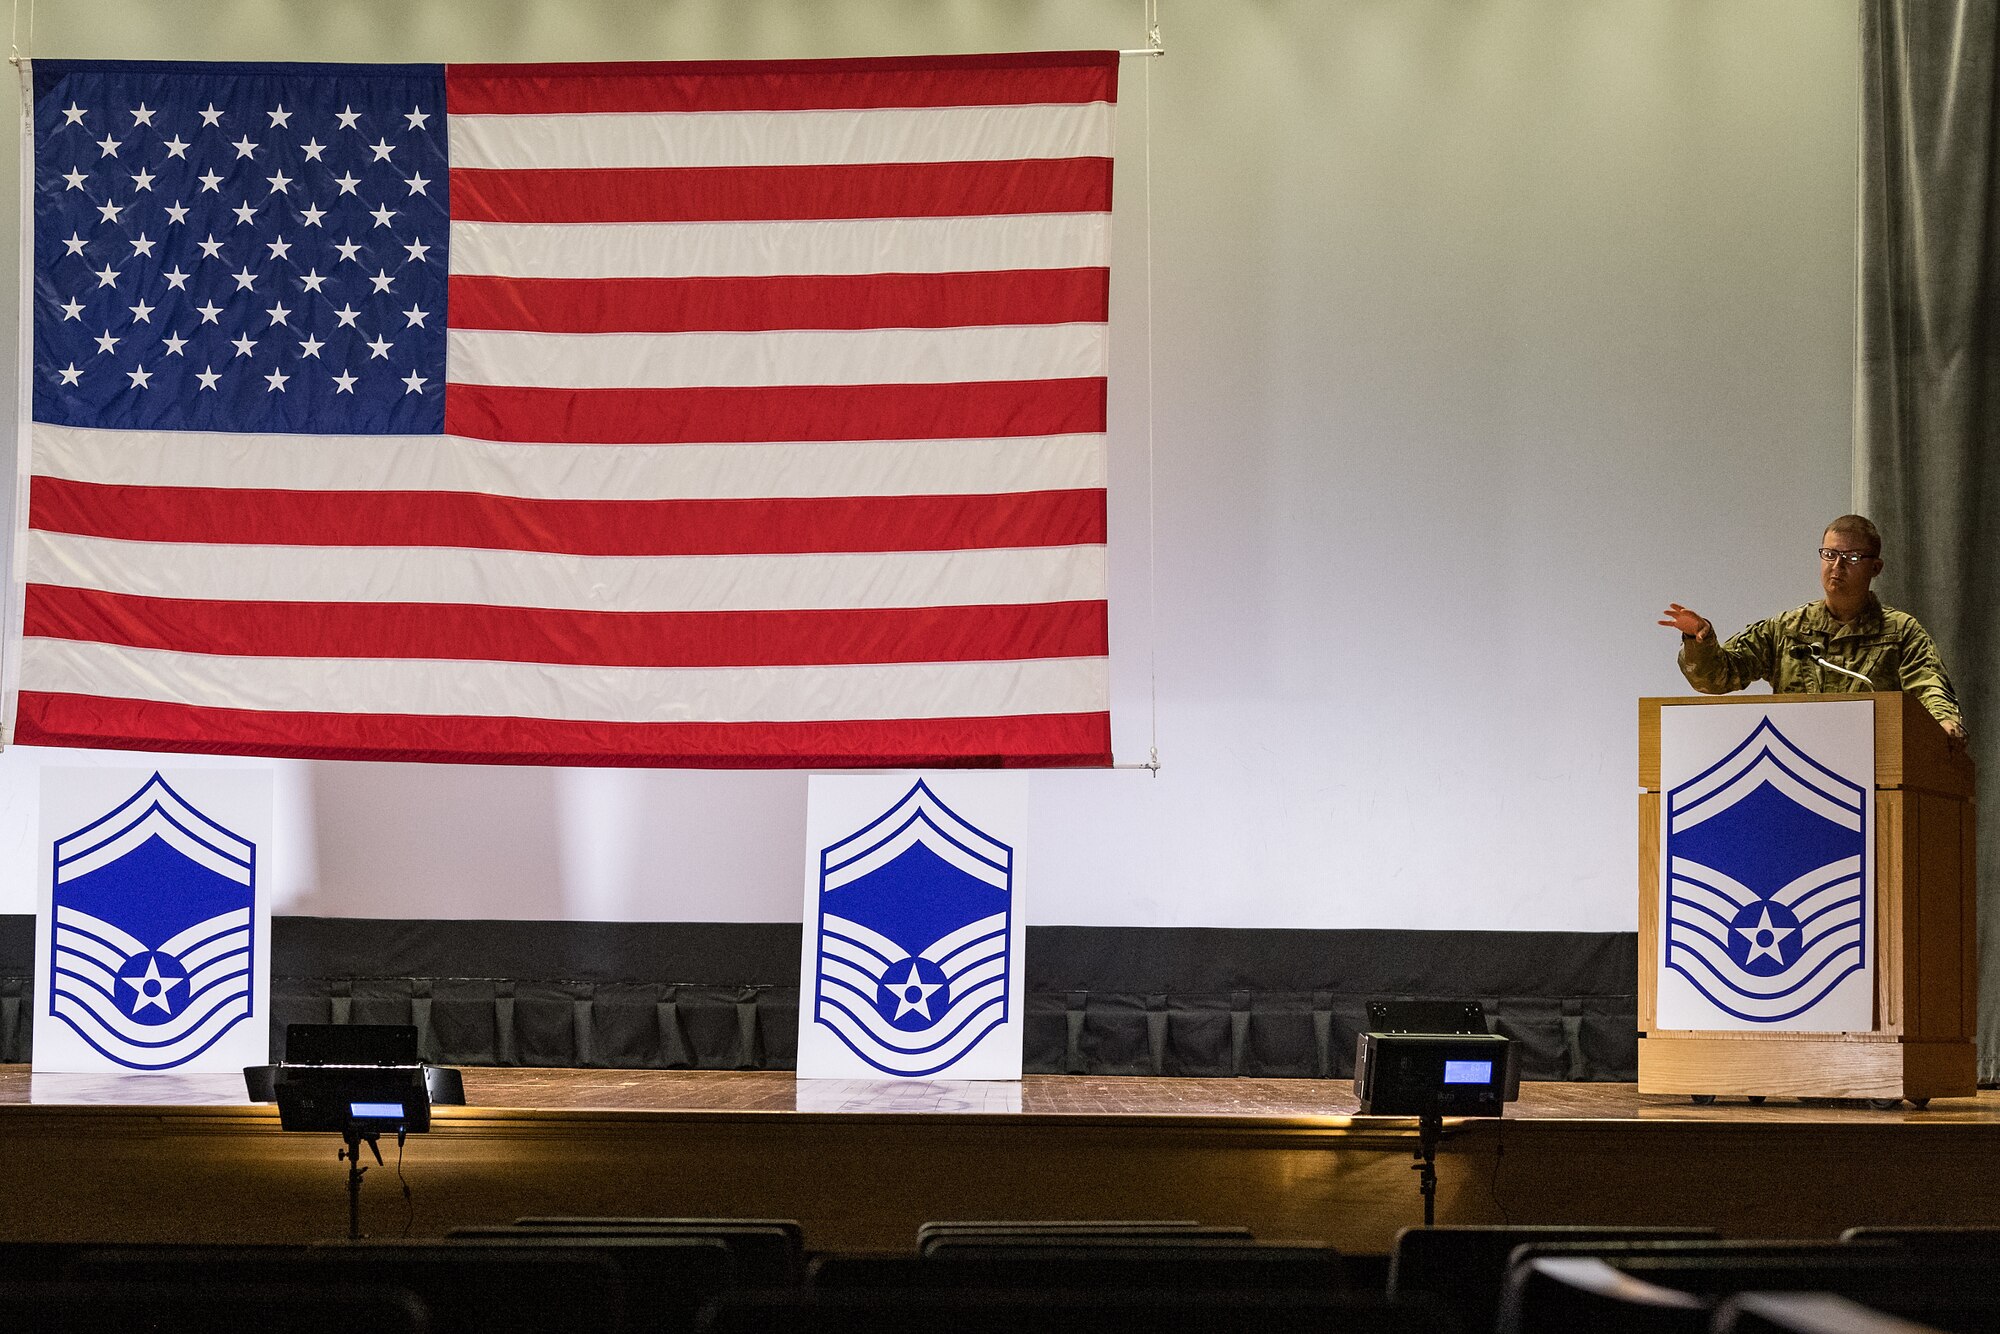 Col. Matthew Jones, 436th Airlift Wing commander, makes closing remarks during the senior master sergeant promotion release ceremony held at the base theater on Dover Air Force Base, Delaware, March 26, 2021. Ten master sergeants at Dover AFB were selected for promotion to senior master sergeant in the 21E8 promotion cycle. (U.S. Air Force photo by Roland Balik)